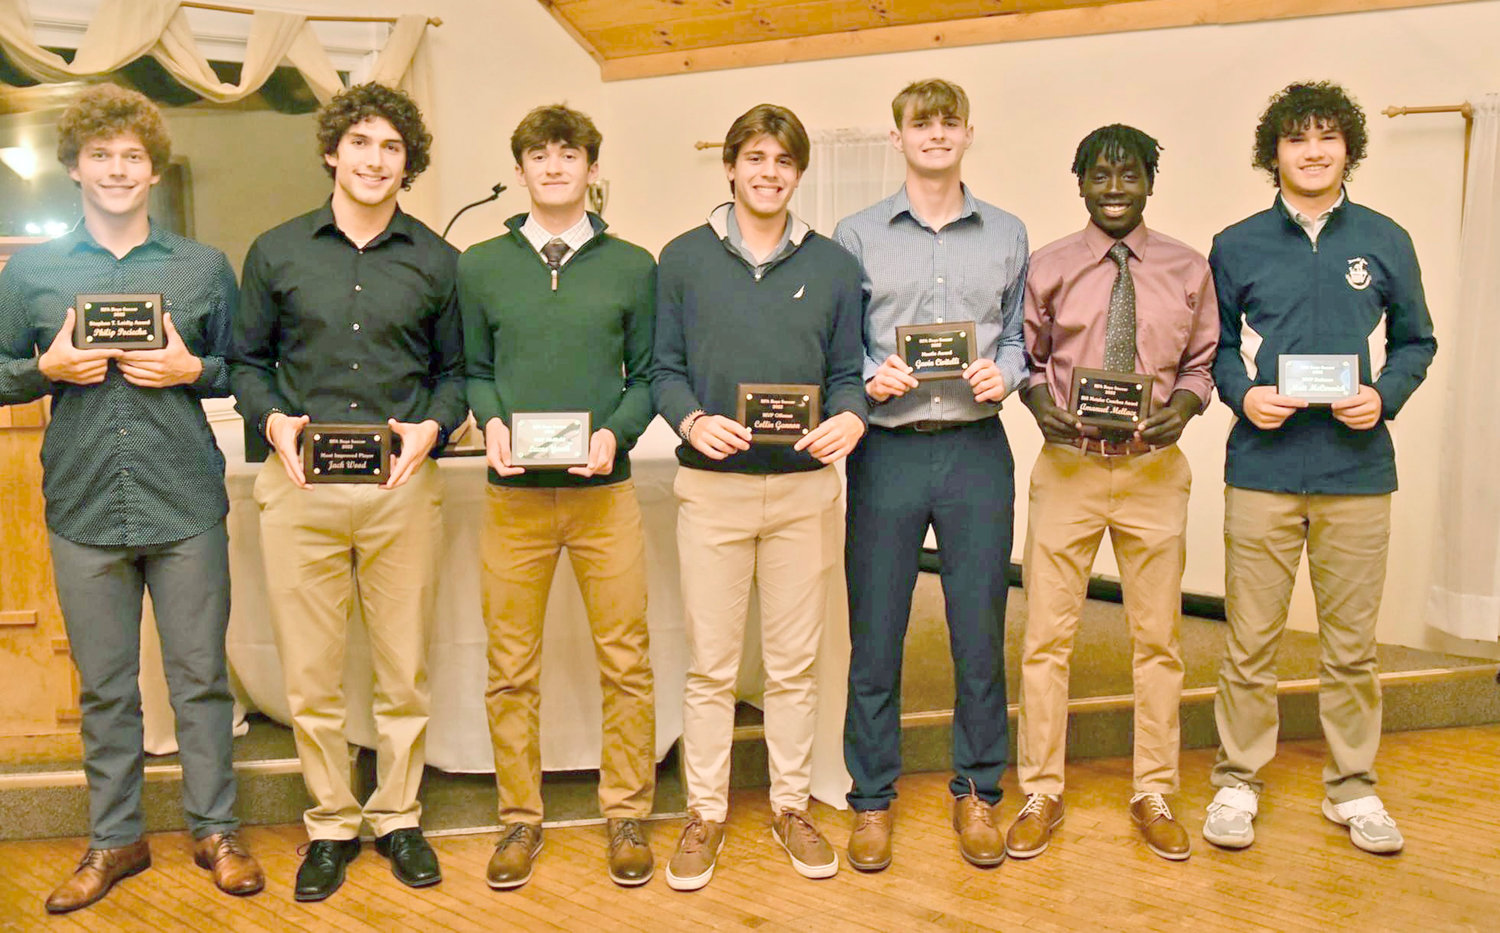 BOYS SOCCER AWARDS — The Rome Free Academy boys soccer team gave out awards for the season. From left: Philip Pociecha, Coach Leidig Award; Jack Wood, most improved; Lucas Yanik, MVP Midfield;  Collin Gannon, Copper City United Soccer Club Joe Dundon Scholarship and MVP Offense; Gavin Civitelli, hustle award; Amanuel Mellace, Coach Bill Award; Matt McCormick, MVP Defense. The Black Knights ended the season with a 11-6-1 overall record and an 8-3 record in the Tri-Valley League.